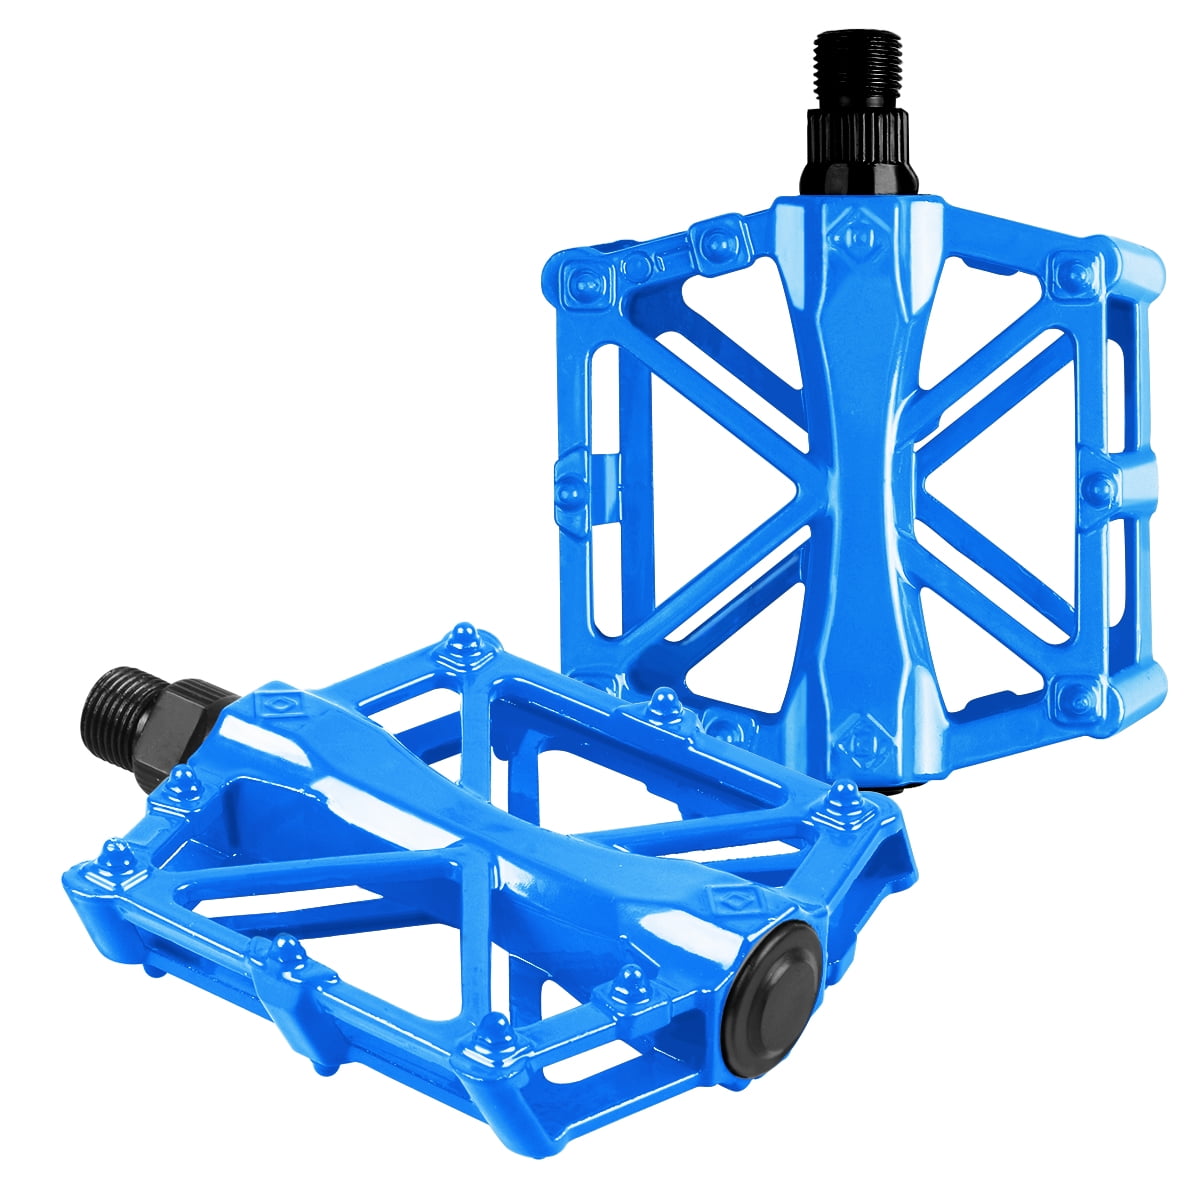 TQS Bicycle Pedals Aluminum Alloy Flat Platform Universal 9/16 In. for BMX  and MTB City Bike, Blue